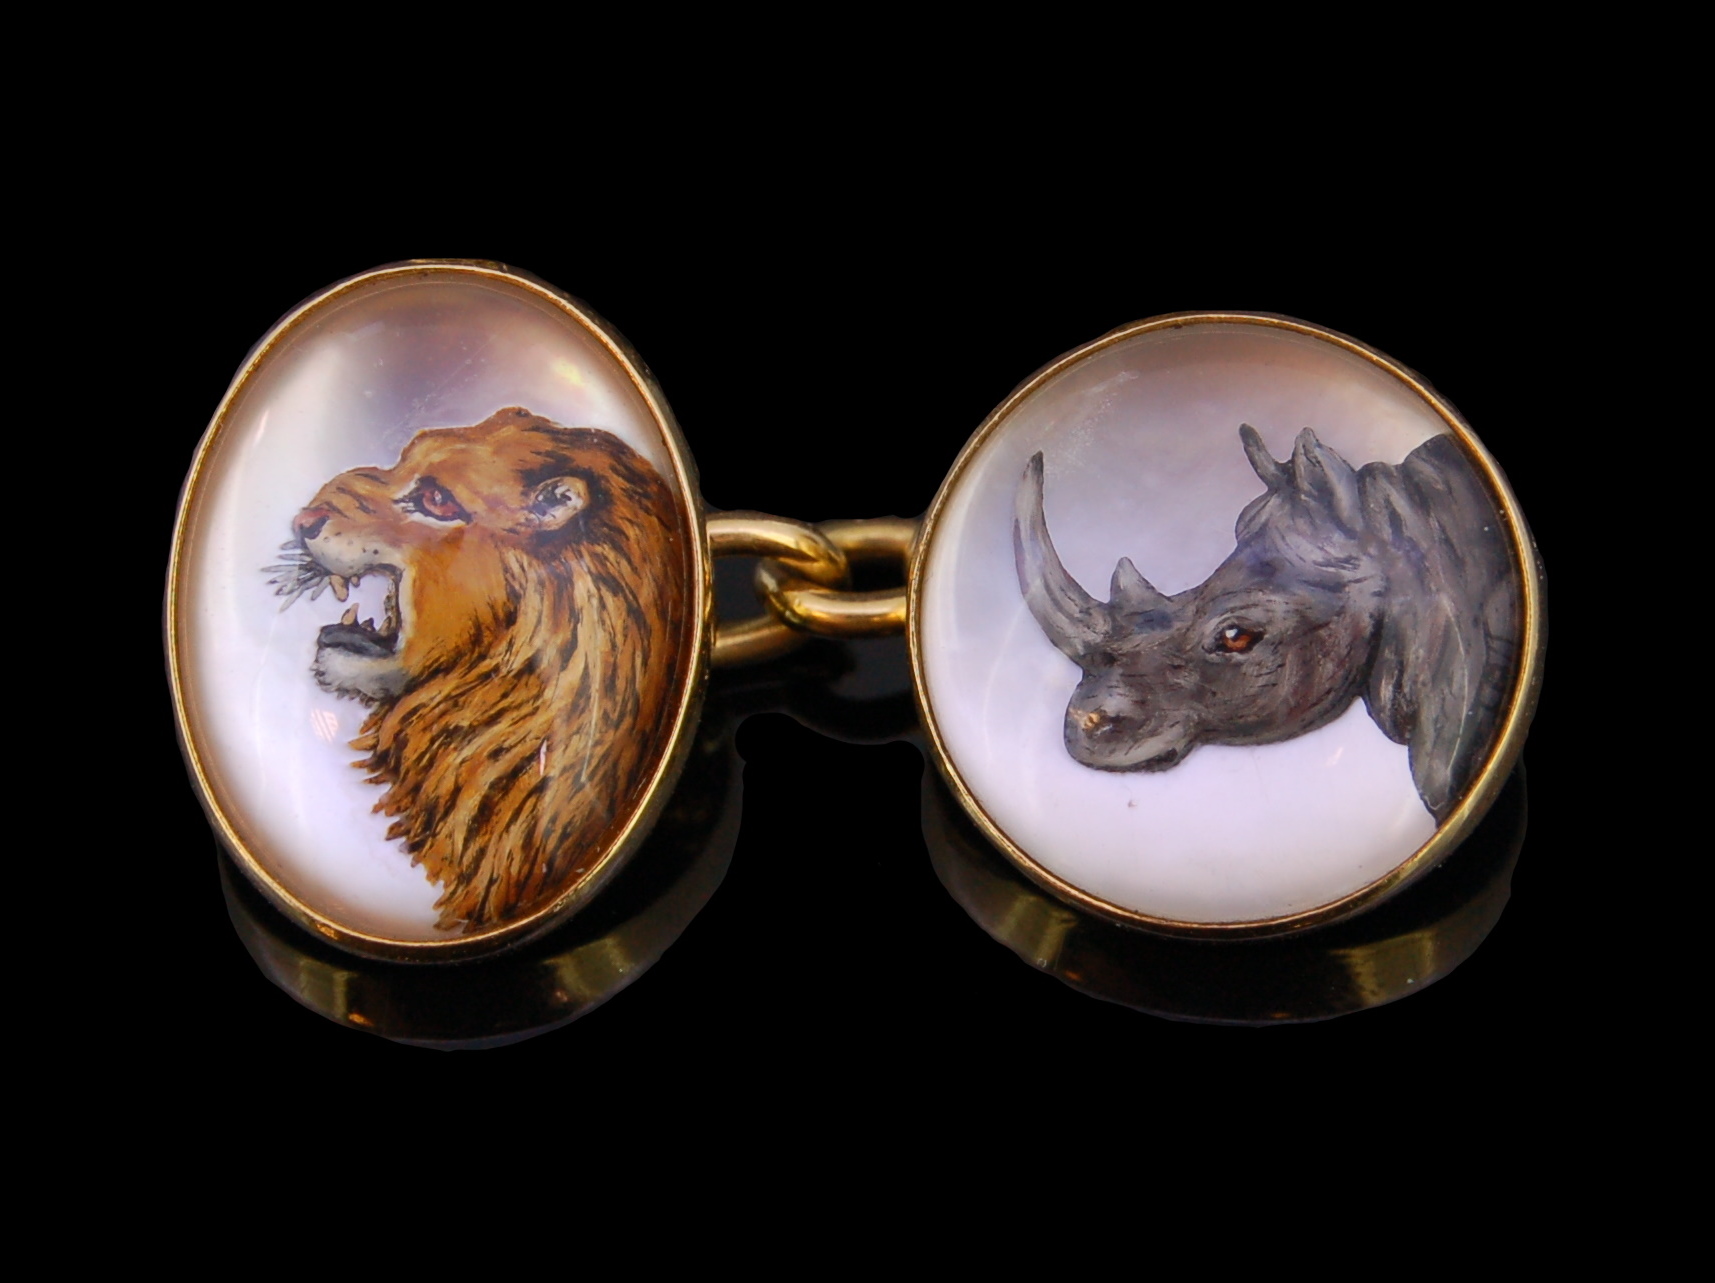 DEAKIN & FRANCIS, A PAIR OF REVERSE INTAGLIO LION AND RHINO CUFFLINK - Image 2 of 4